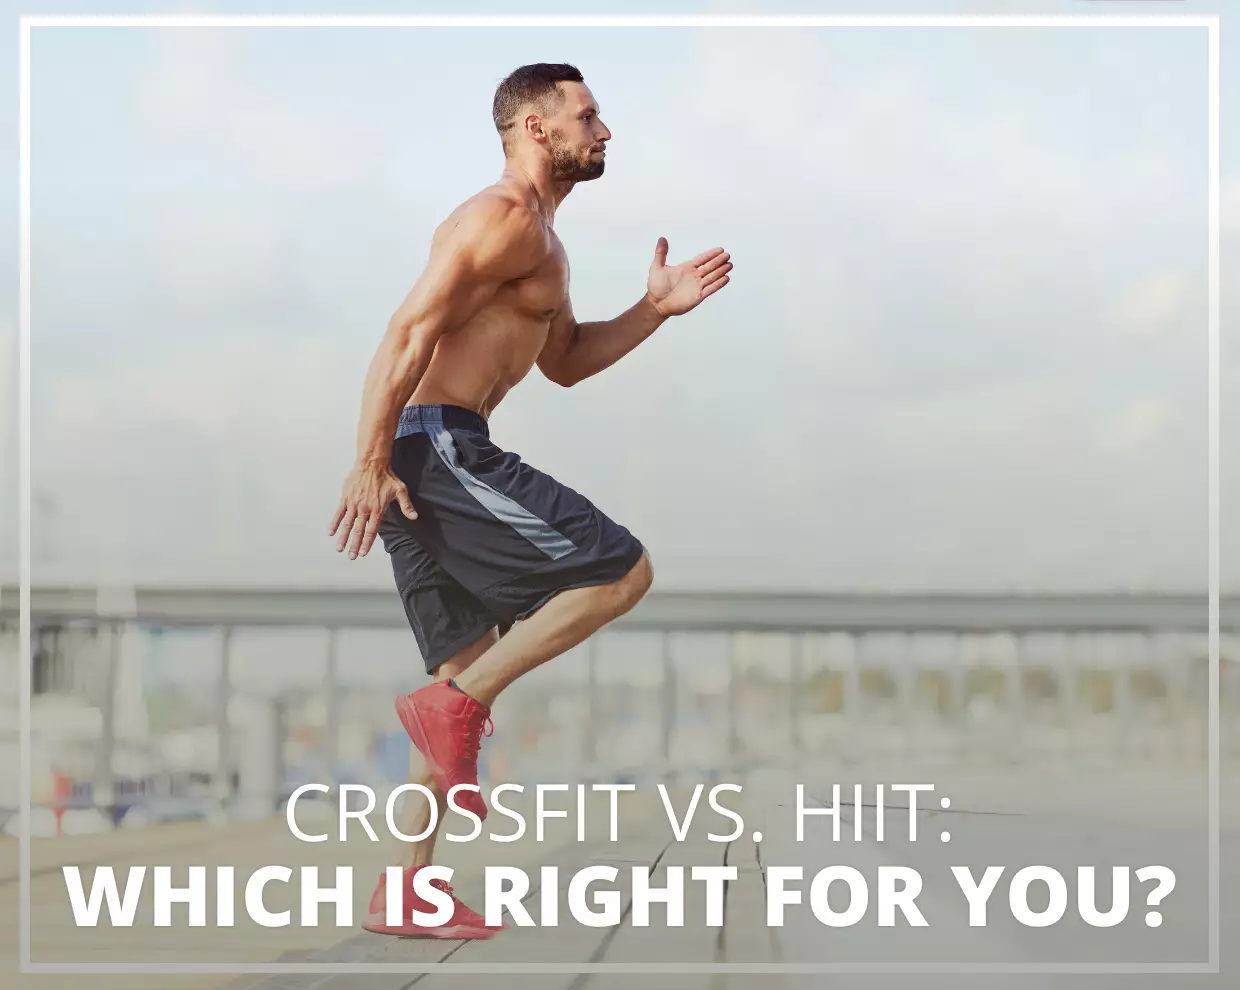 CrossFit vs. HIIT: Which is Right for You?